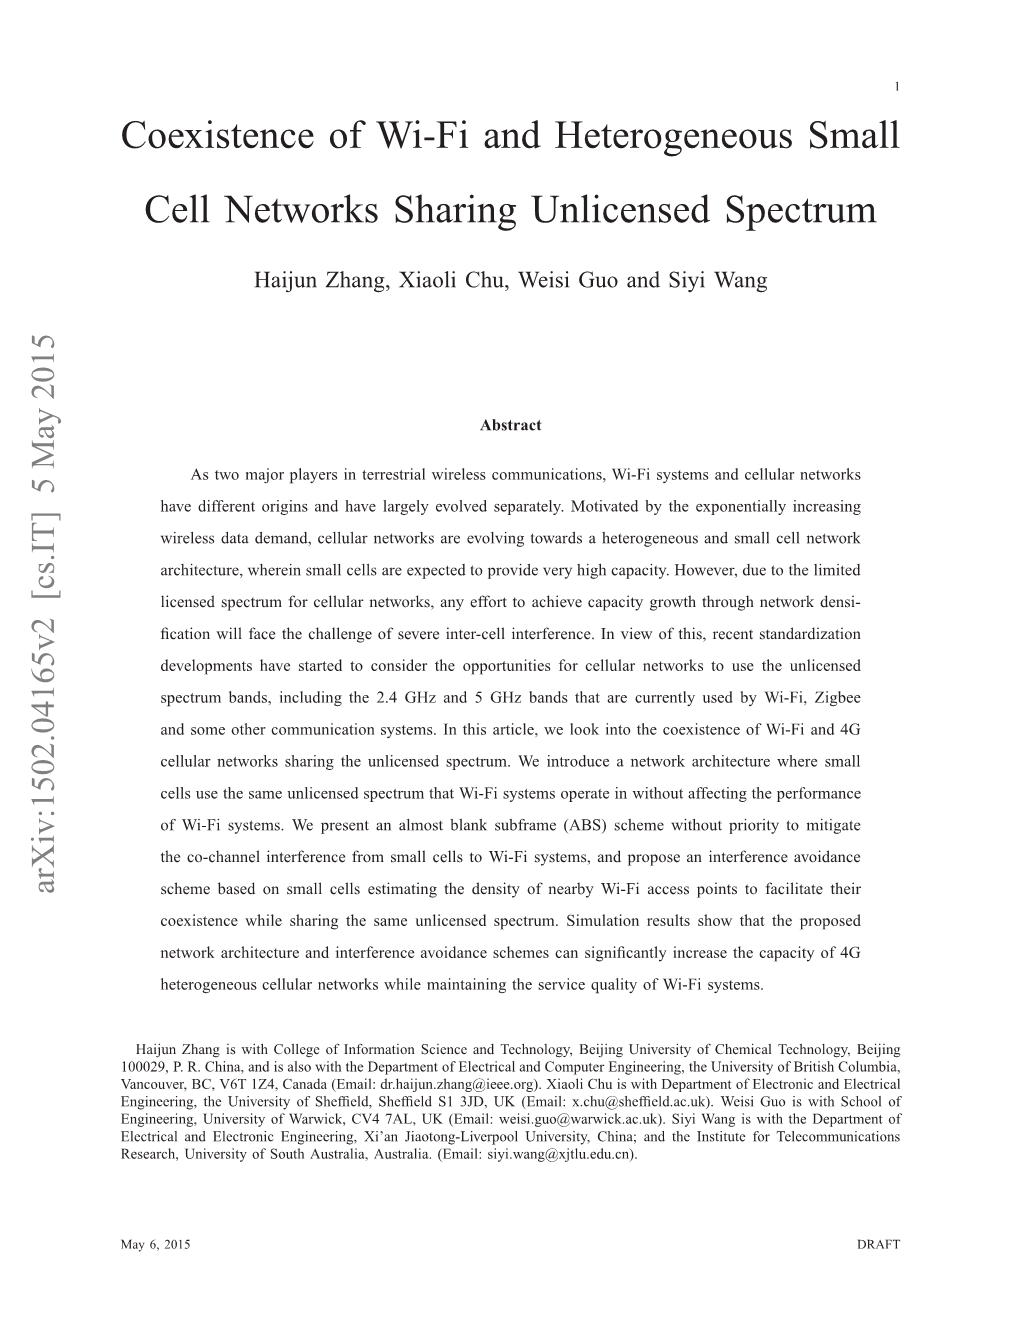 Coexistence of Wi-Fi and Heterogeneous Small Cell